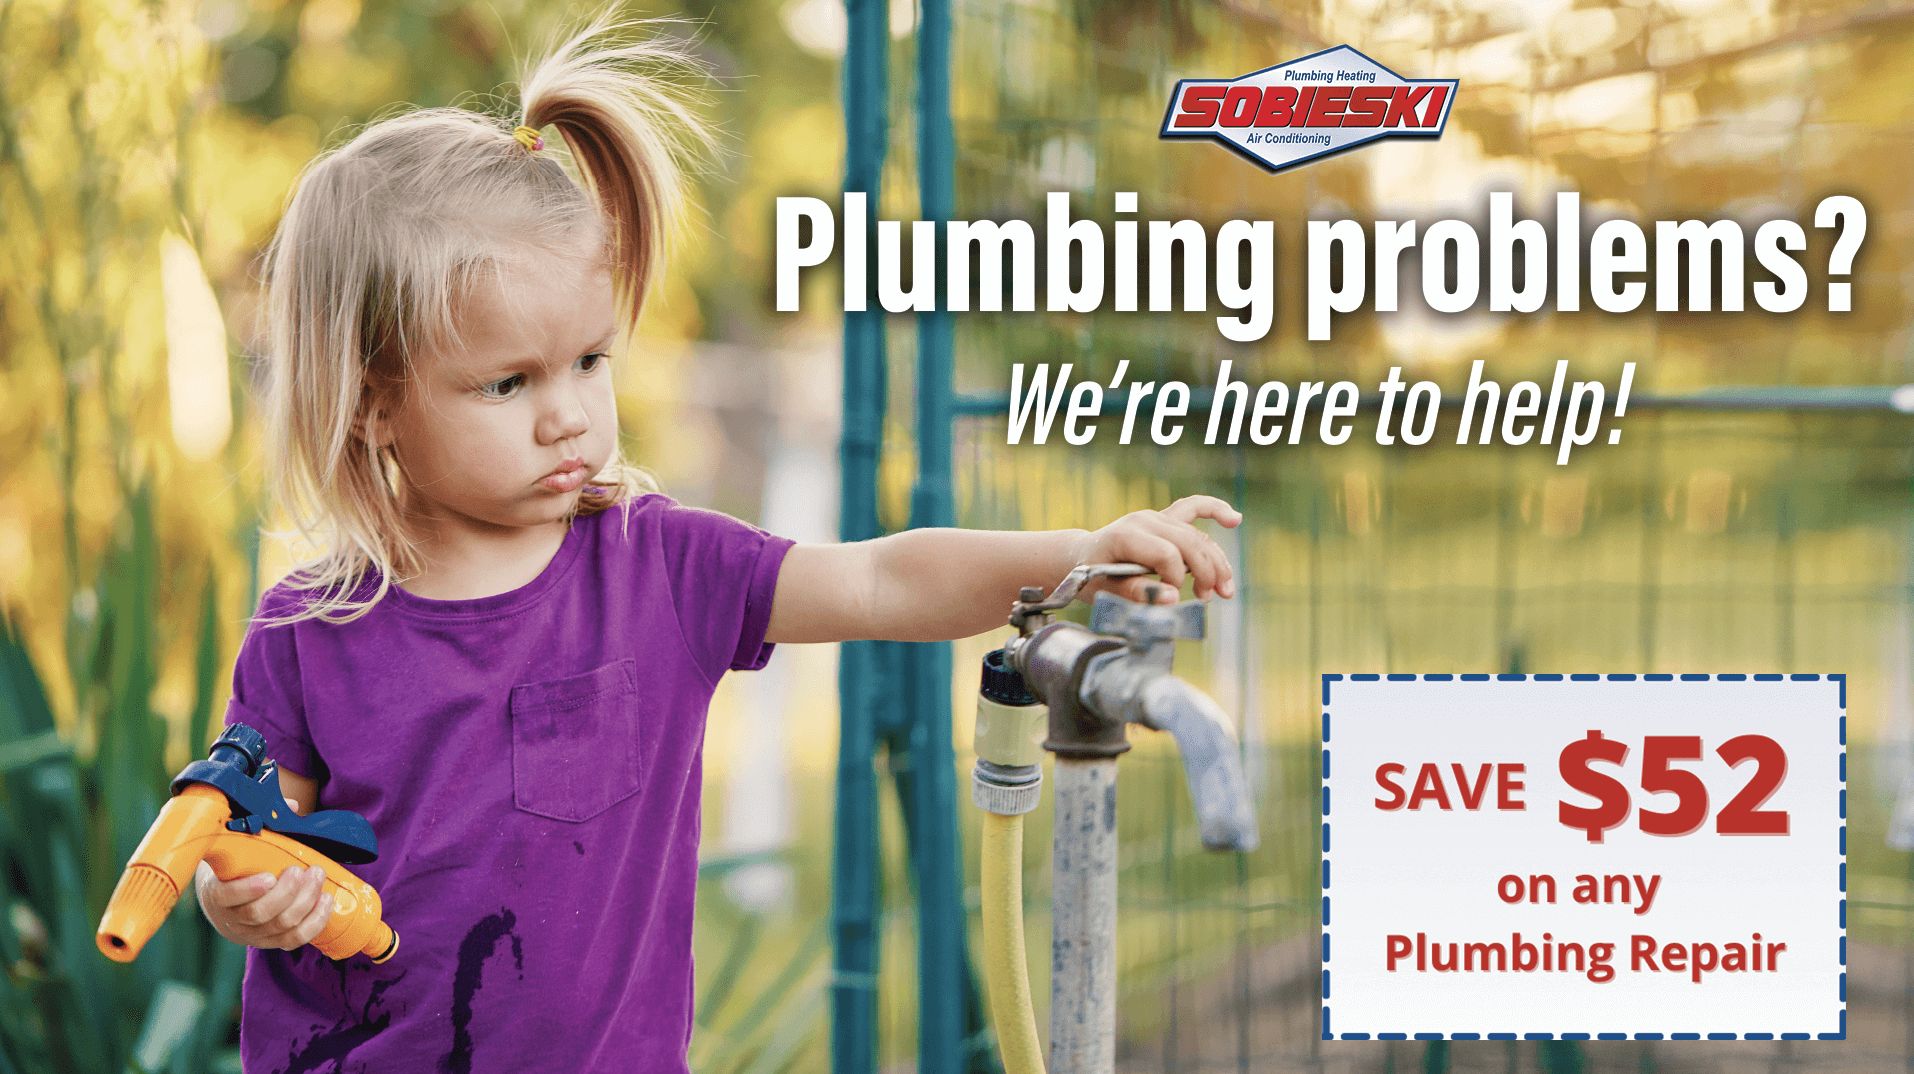 We are plumbing experts!